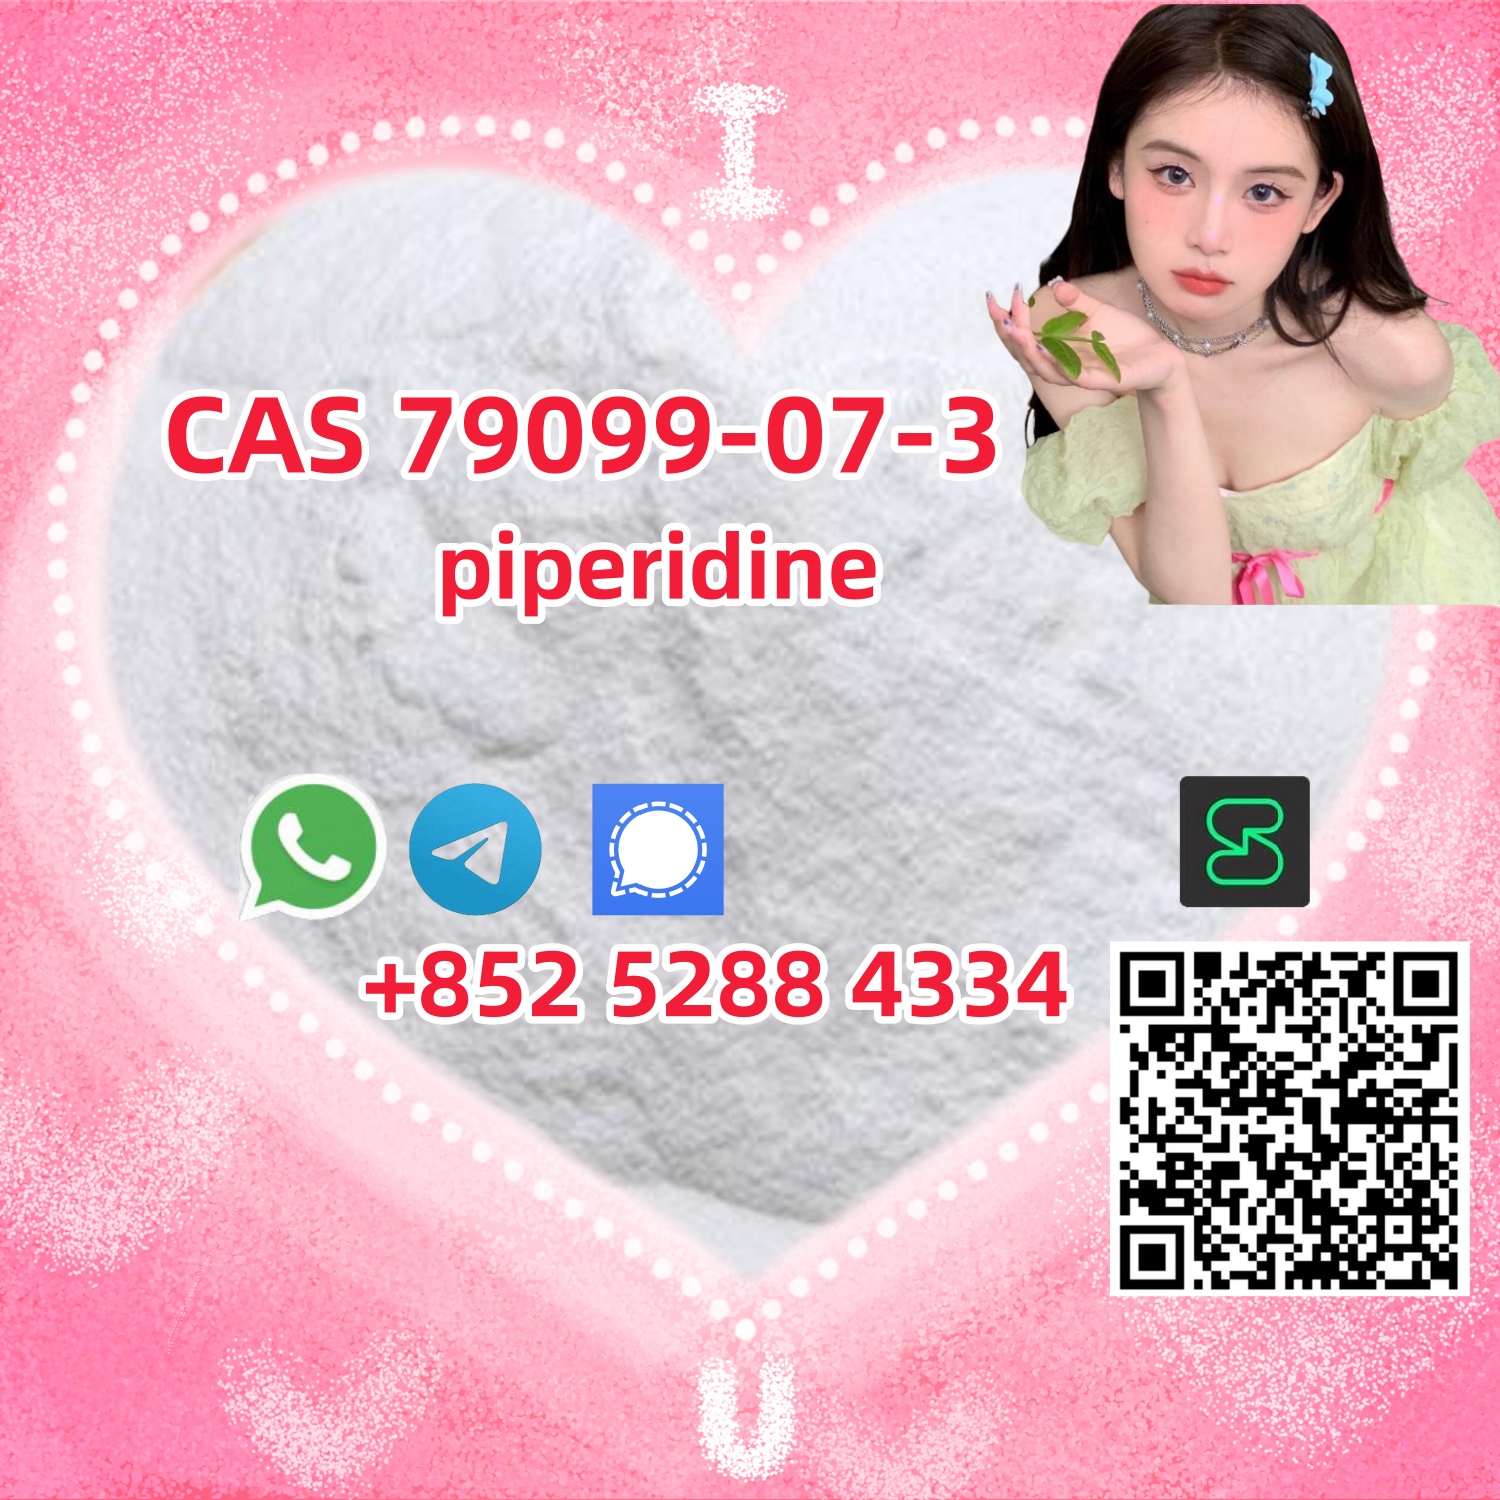 Hot Sell piperidine raw powder CAS 79099-07-3,aaaaa,Others,Free Classifieds,Post Free Ads,77traders.com